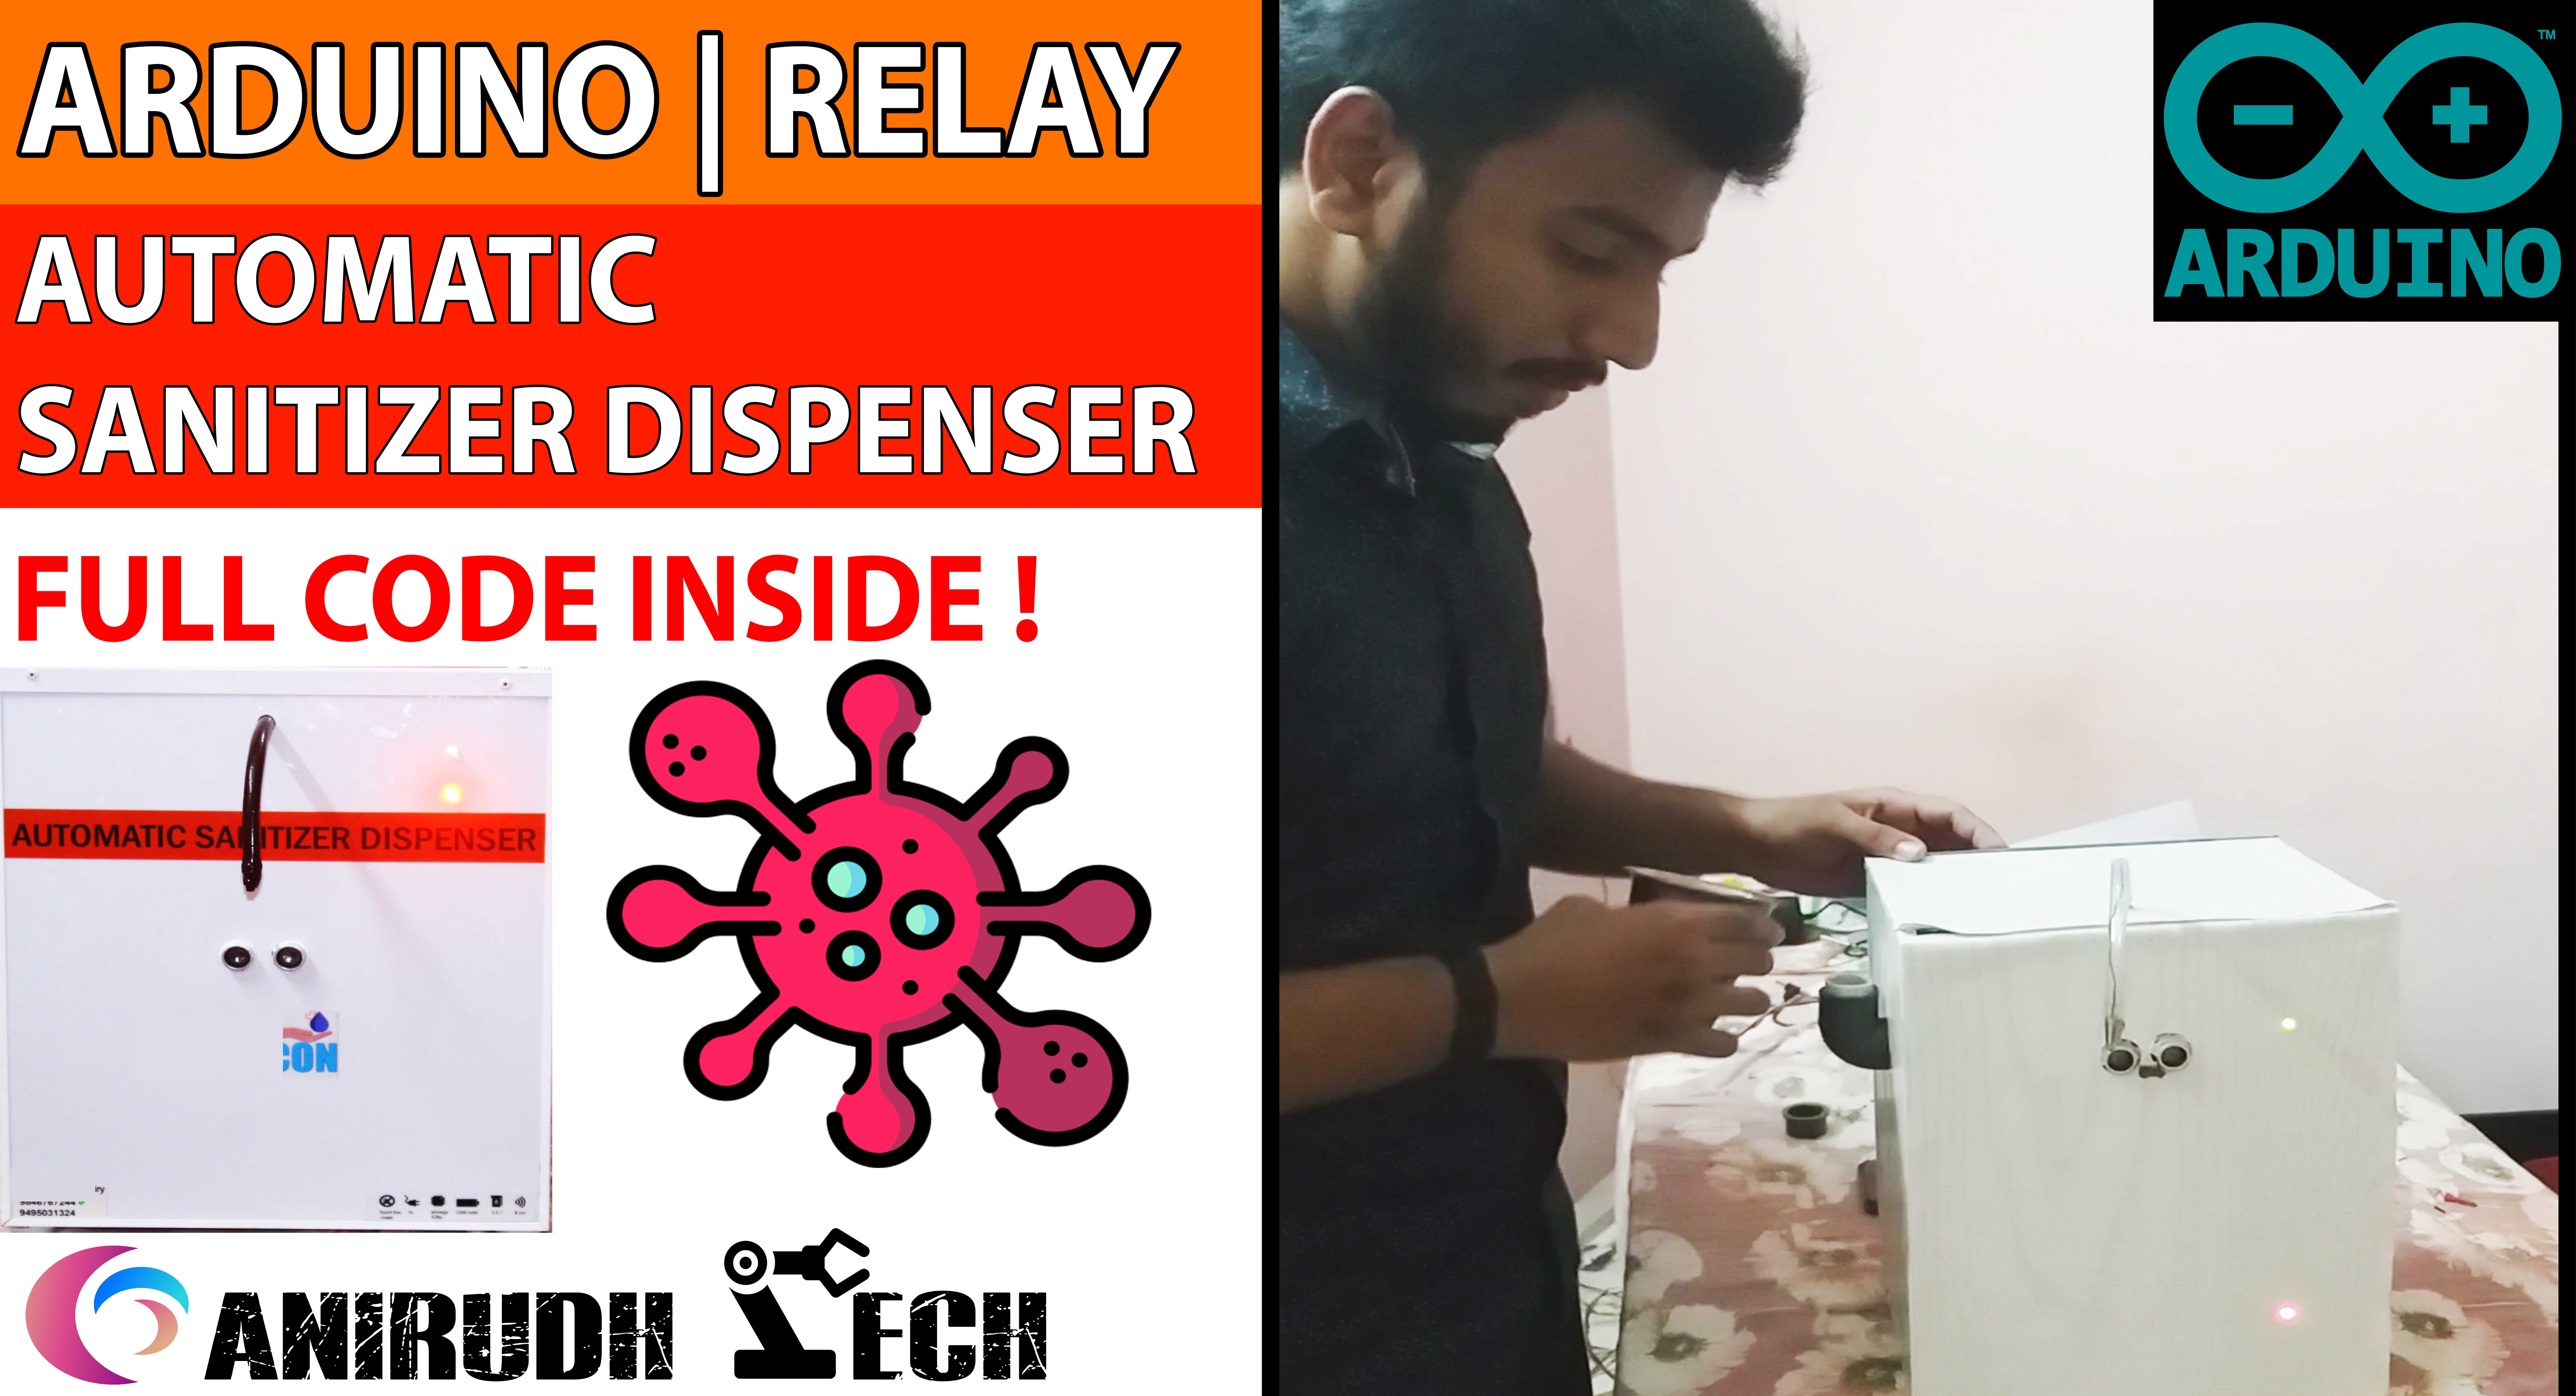 Automatic Sanitizer dispenser
// Written by Anas.AP
// Using Arduino IDE 1.8.12
// Using HC-SR04 Module
// Tested on 16 May 2020
//If you have do